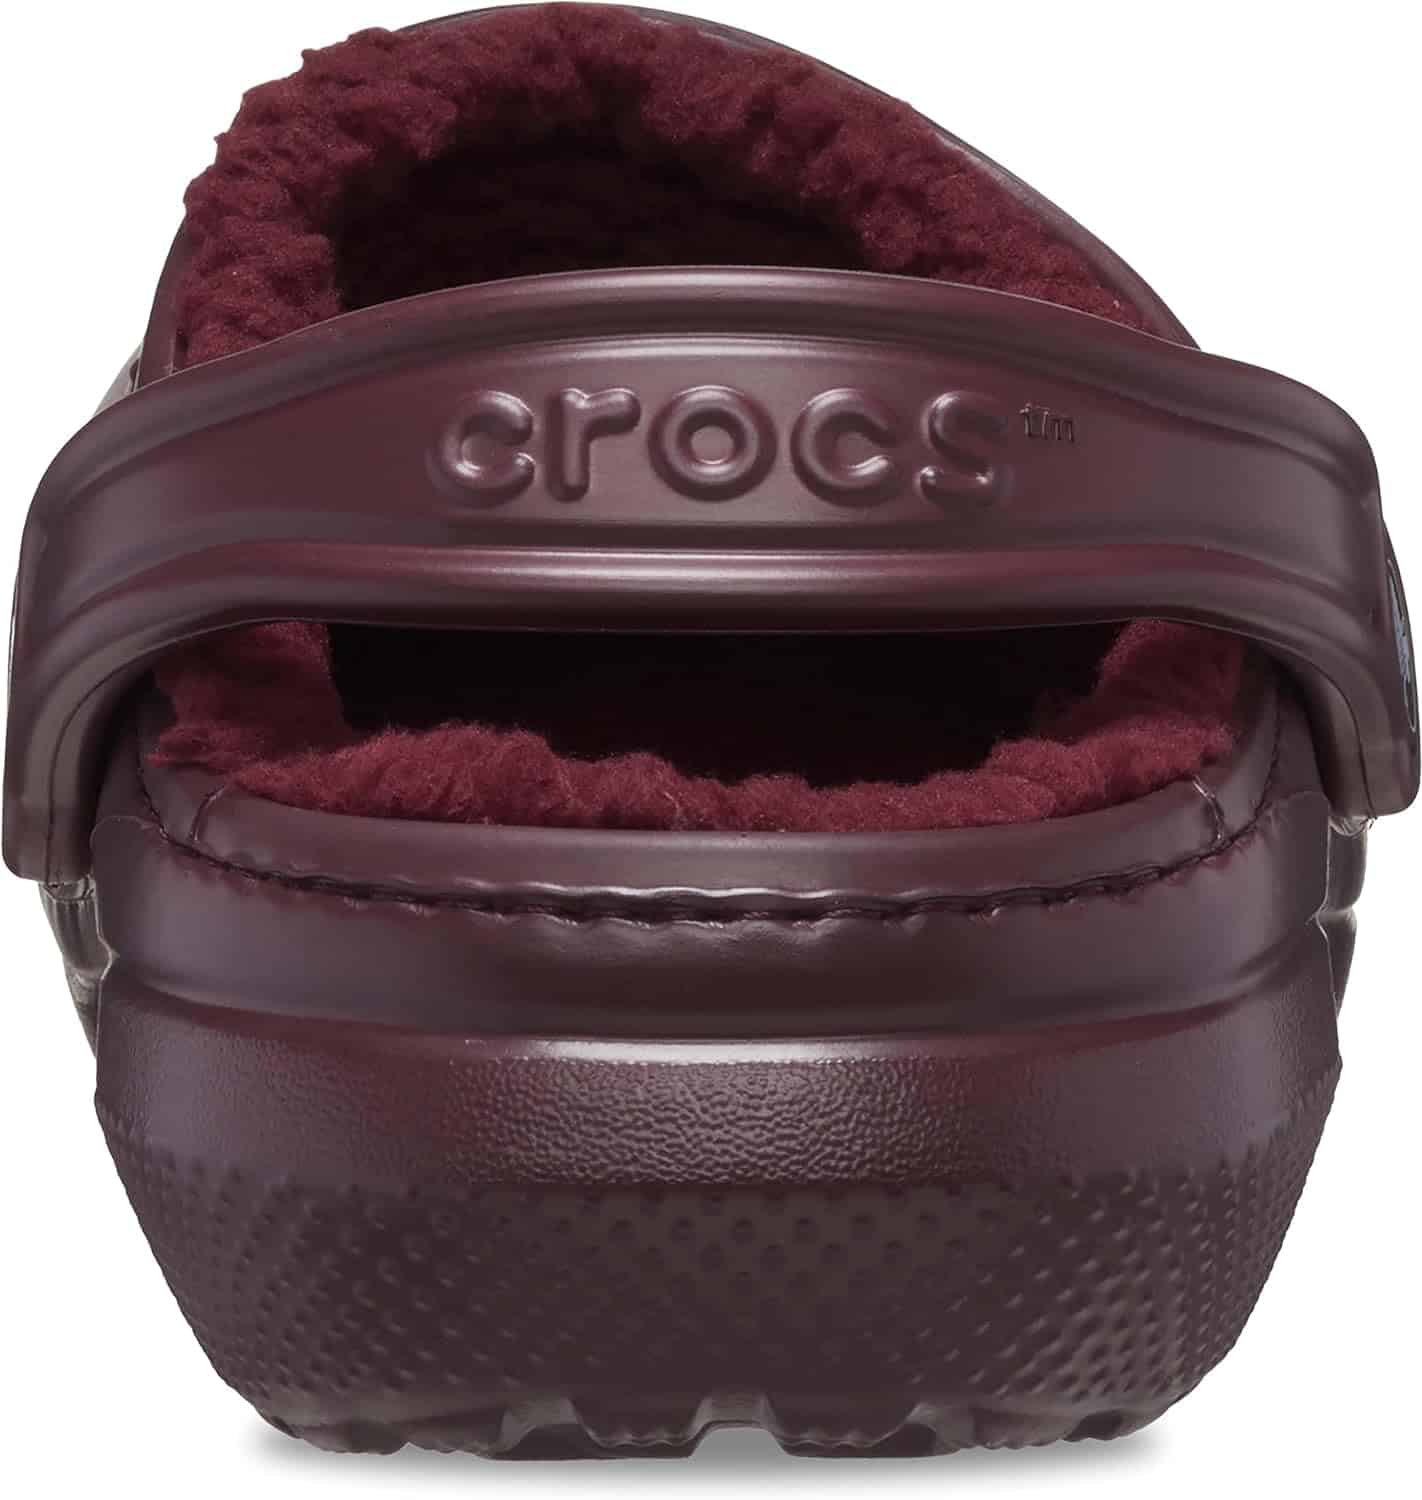 Crocs Classic Lined Clog: A Comfortable and Versatile Footwear Choice